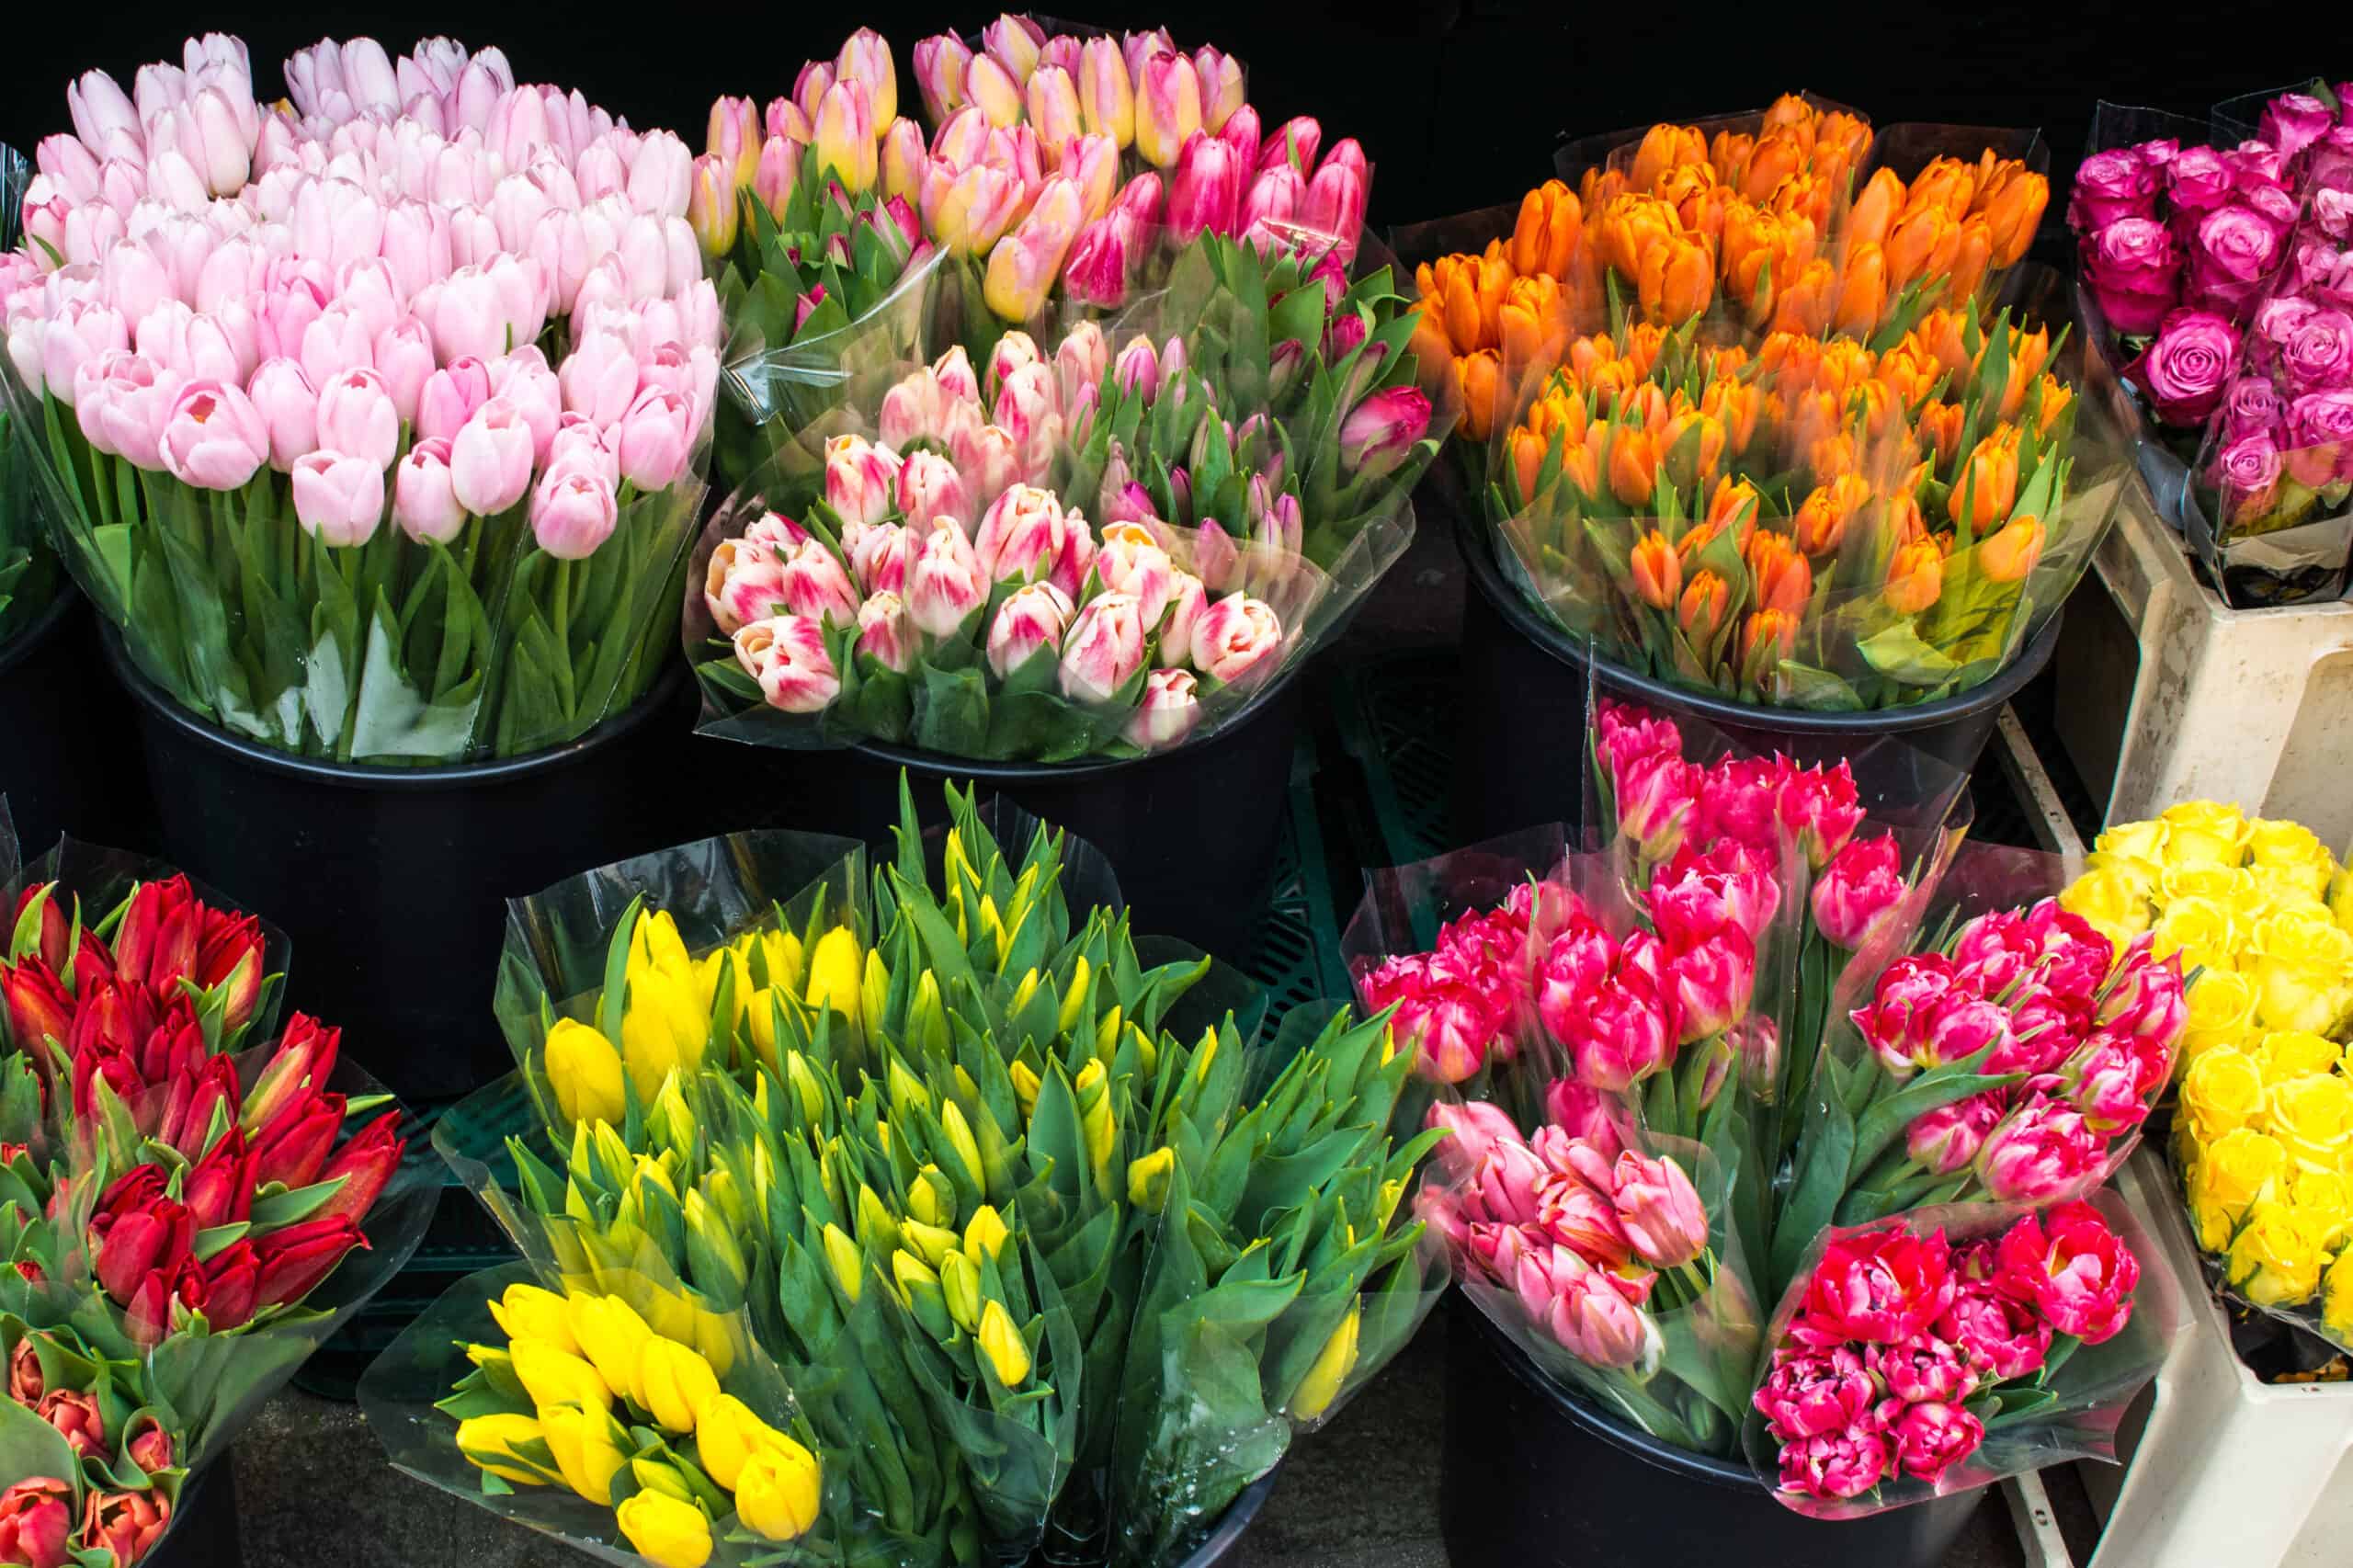 Tulips in many colors